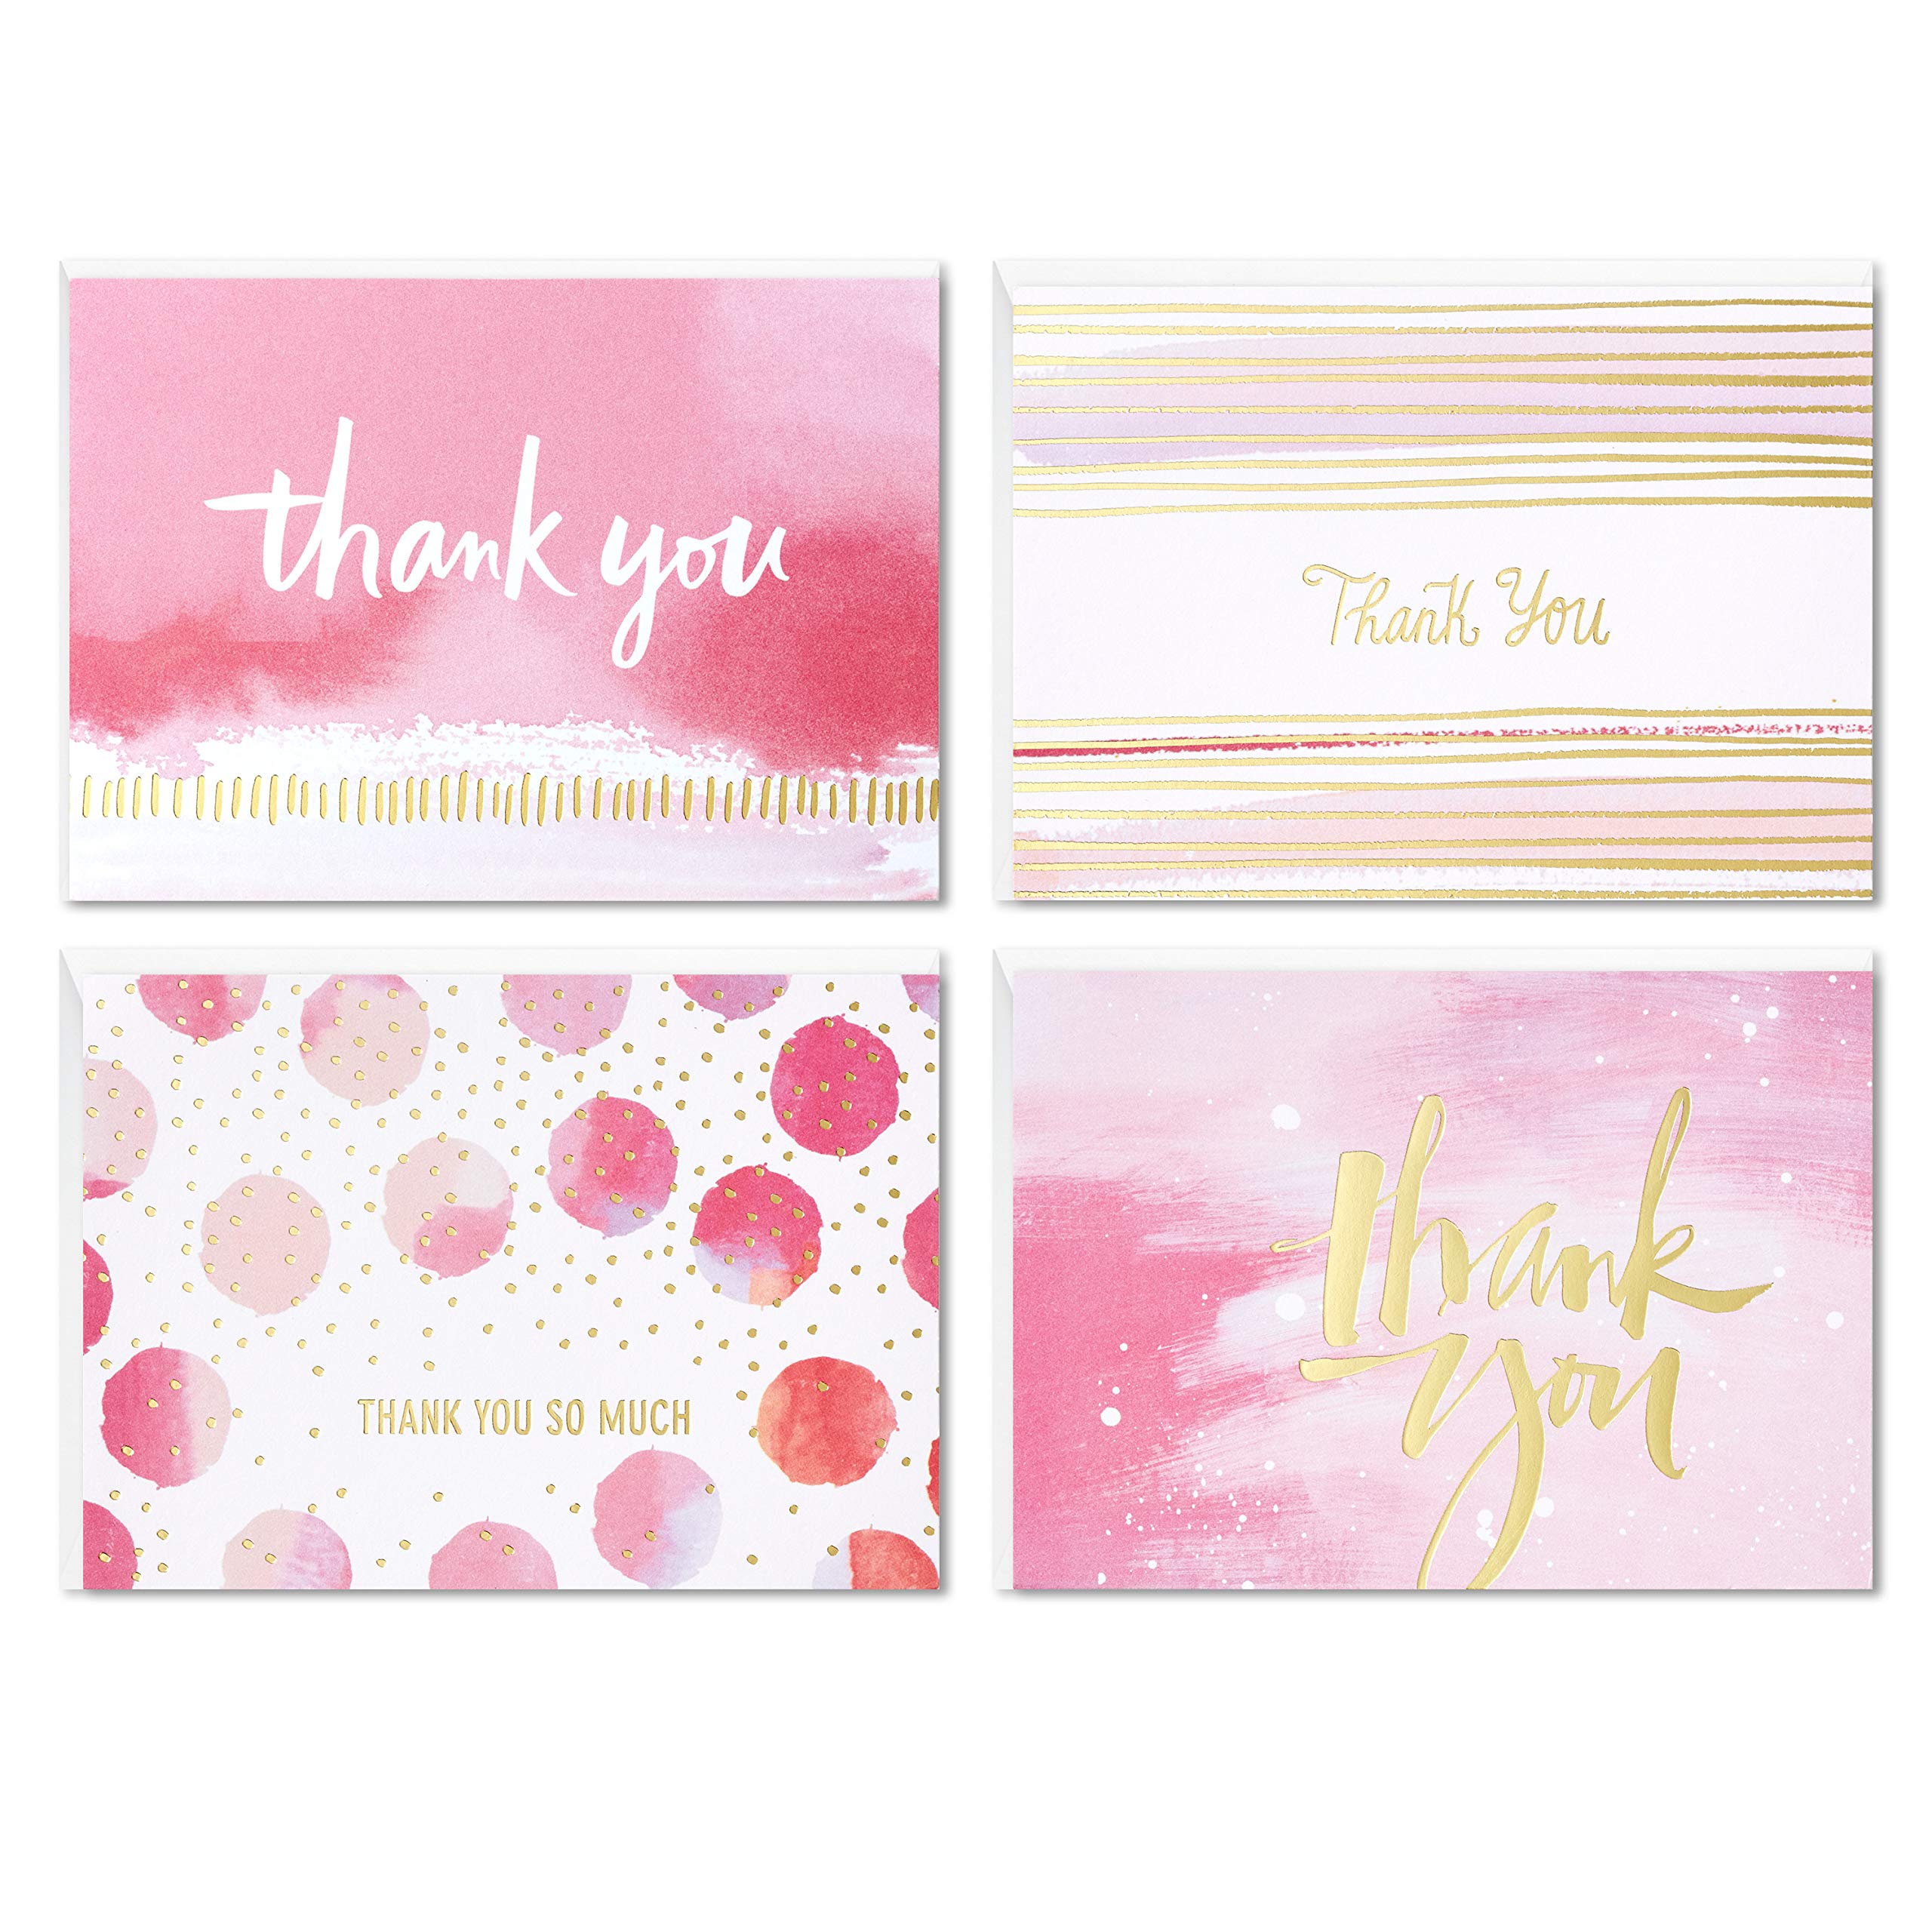 Hallmark Thank You Cards Assortment, Pink and Gold Watercolor & Thank You Cards Assortment, Painted Florals (48 Cards with Envelopes for Baby Showers, Bridal Showers, Weddings, All Occasion)